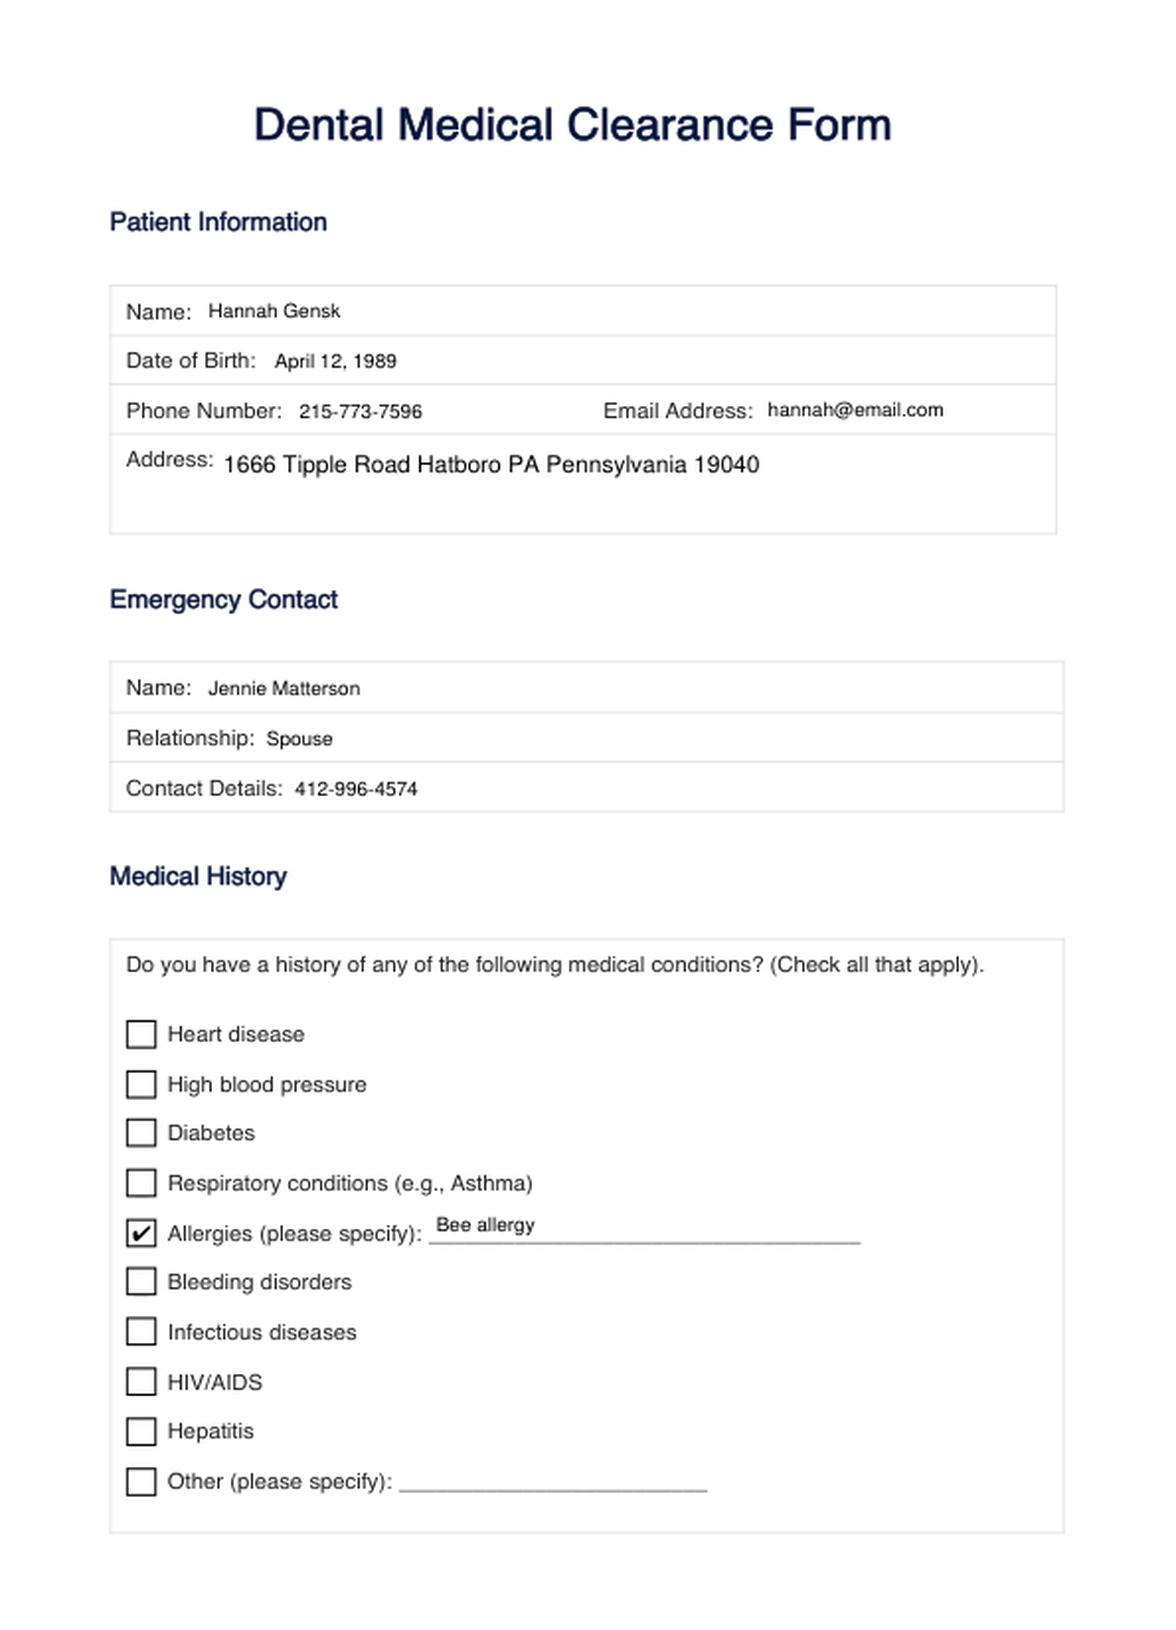 Dental Medical Clearance Form PDF Example